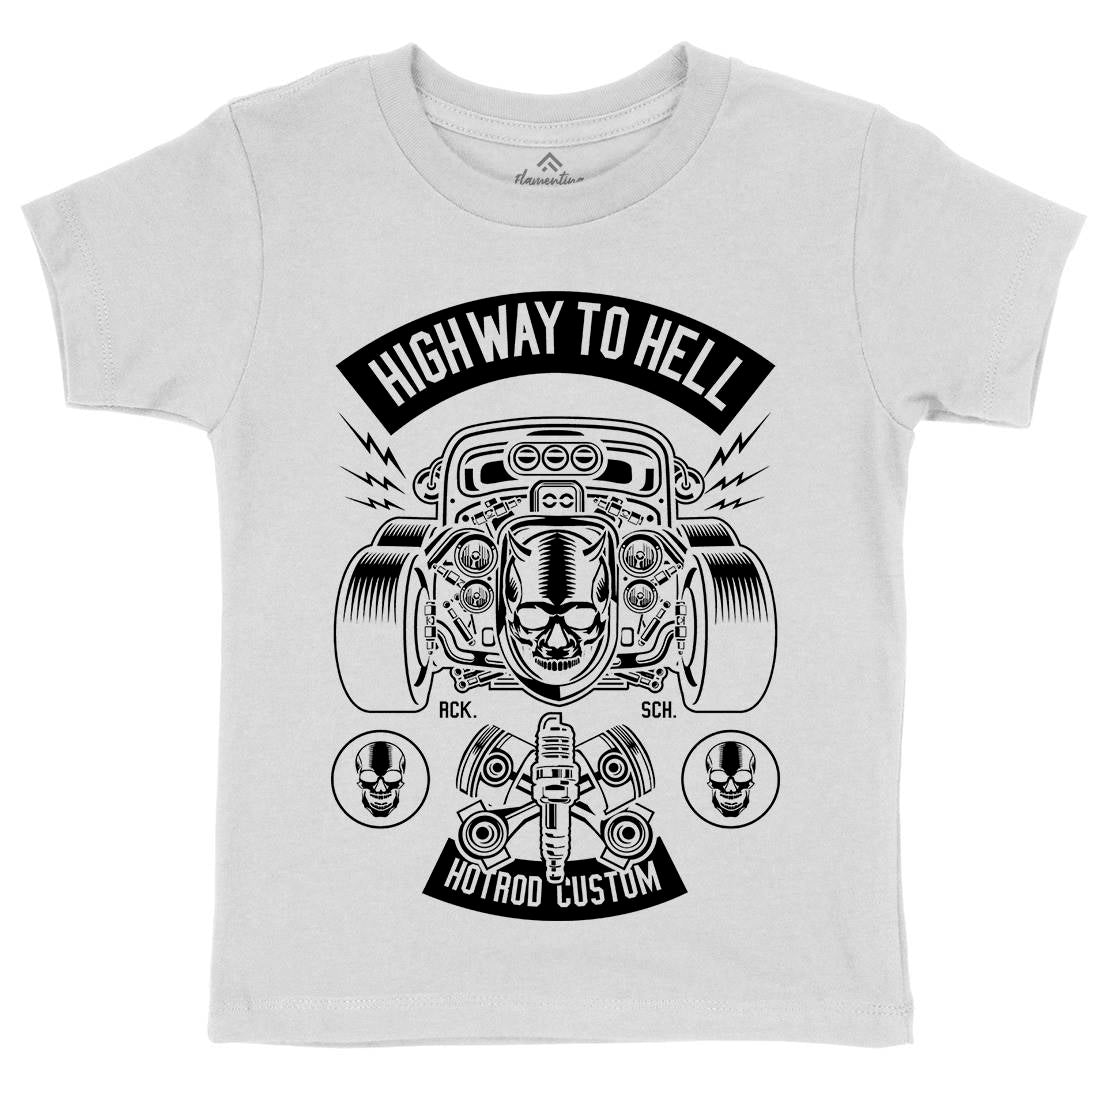 Highway To Hell Kids Crew Neck T-Shirt Cars B556